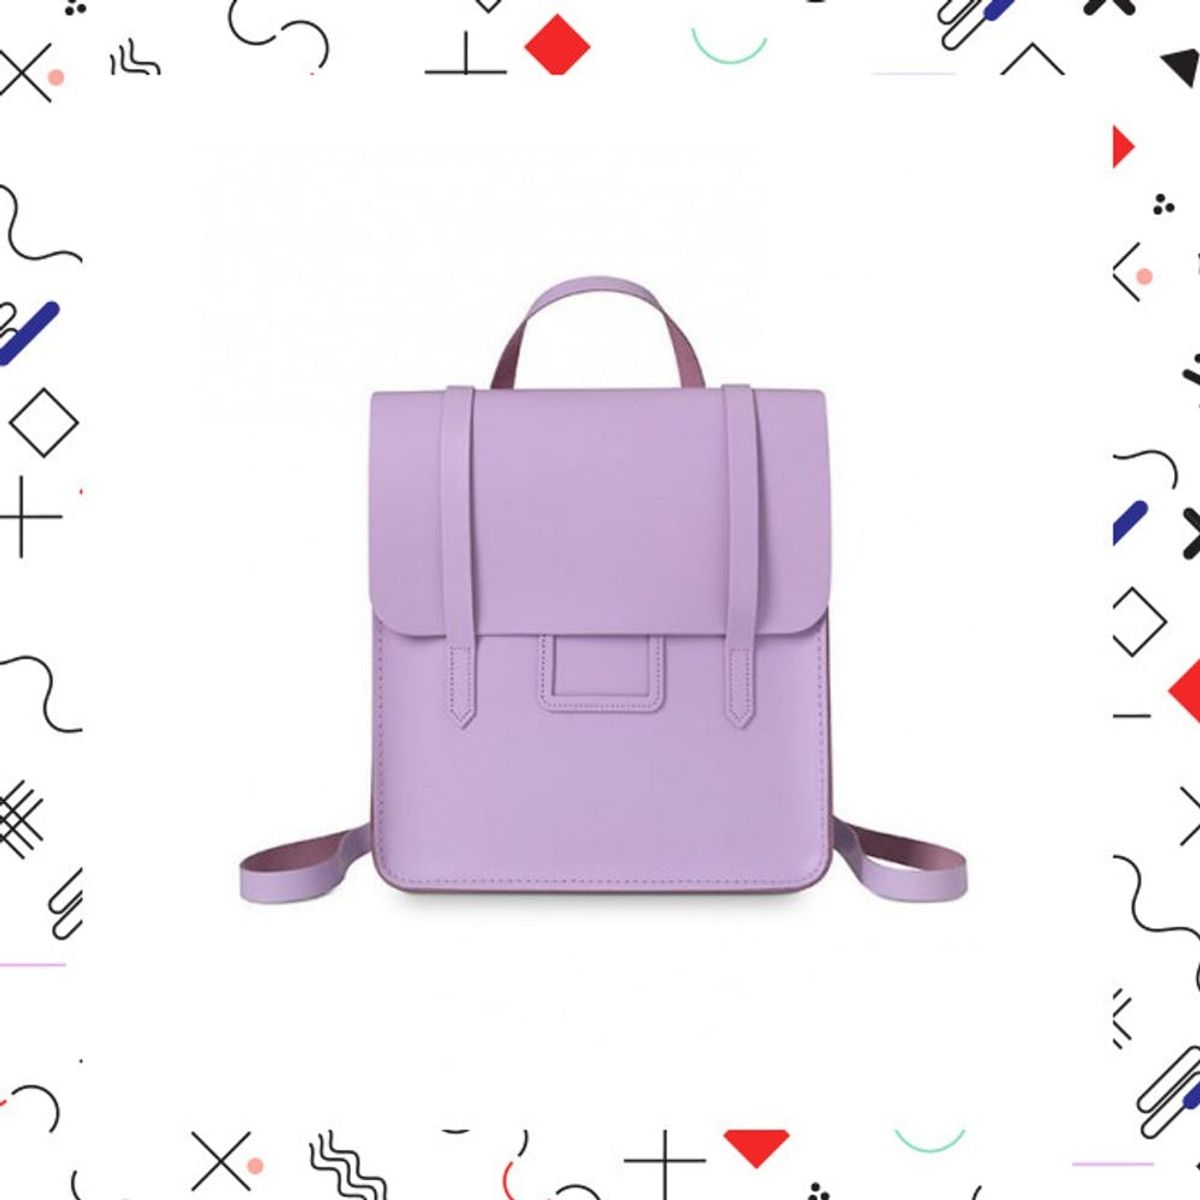 16 Cute Laptop Bags That Make Traveling Chic and Easy